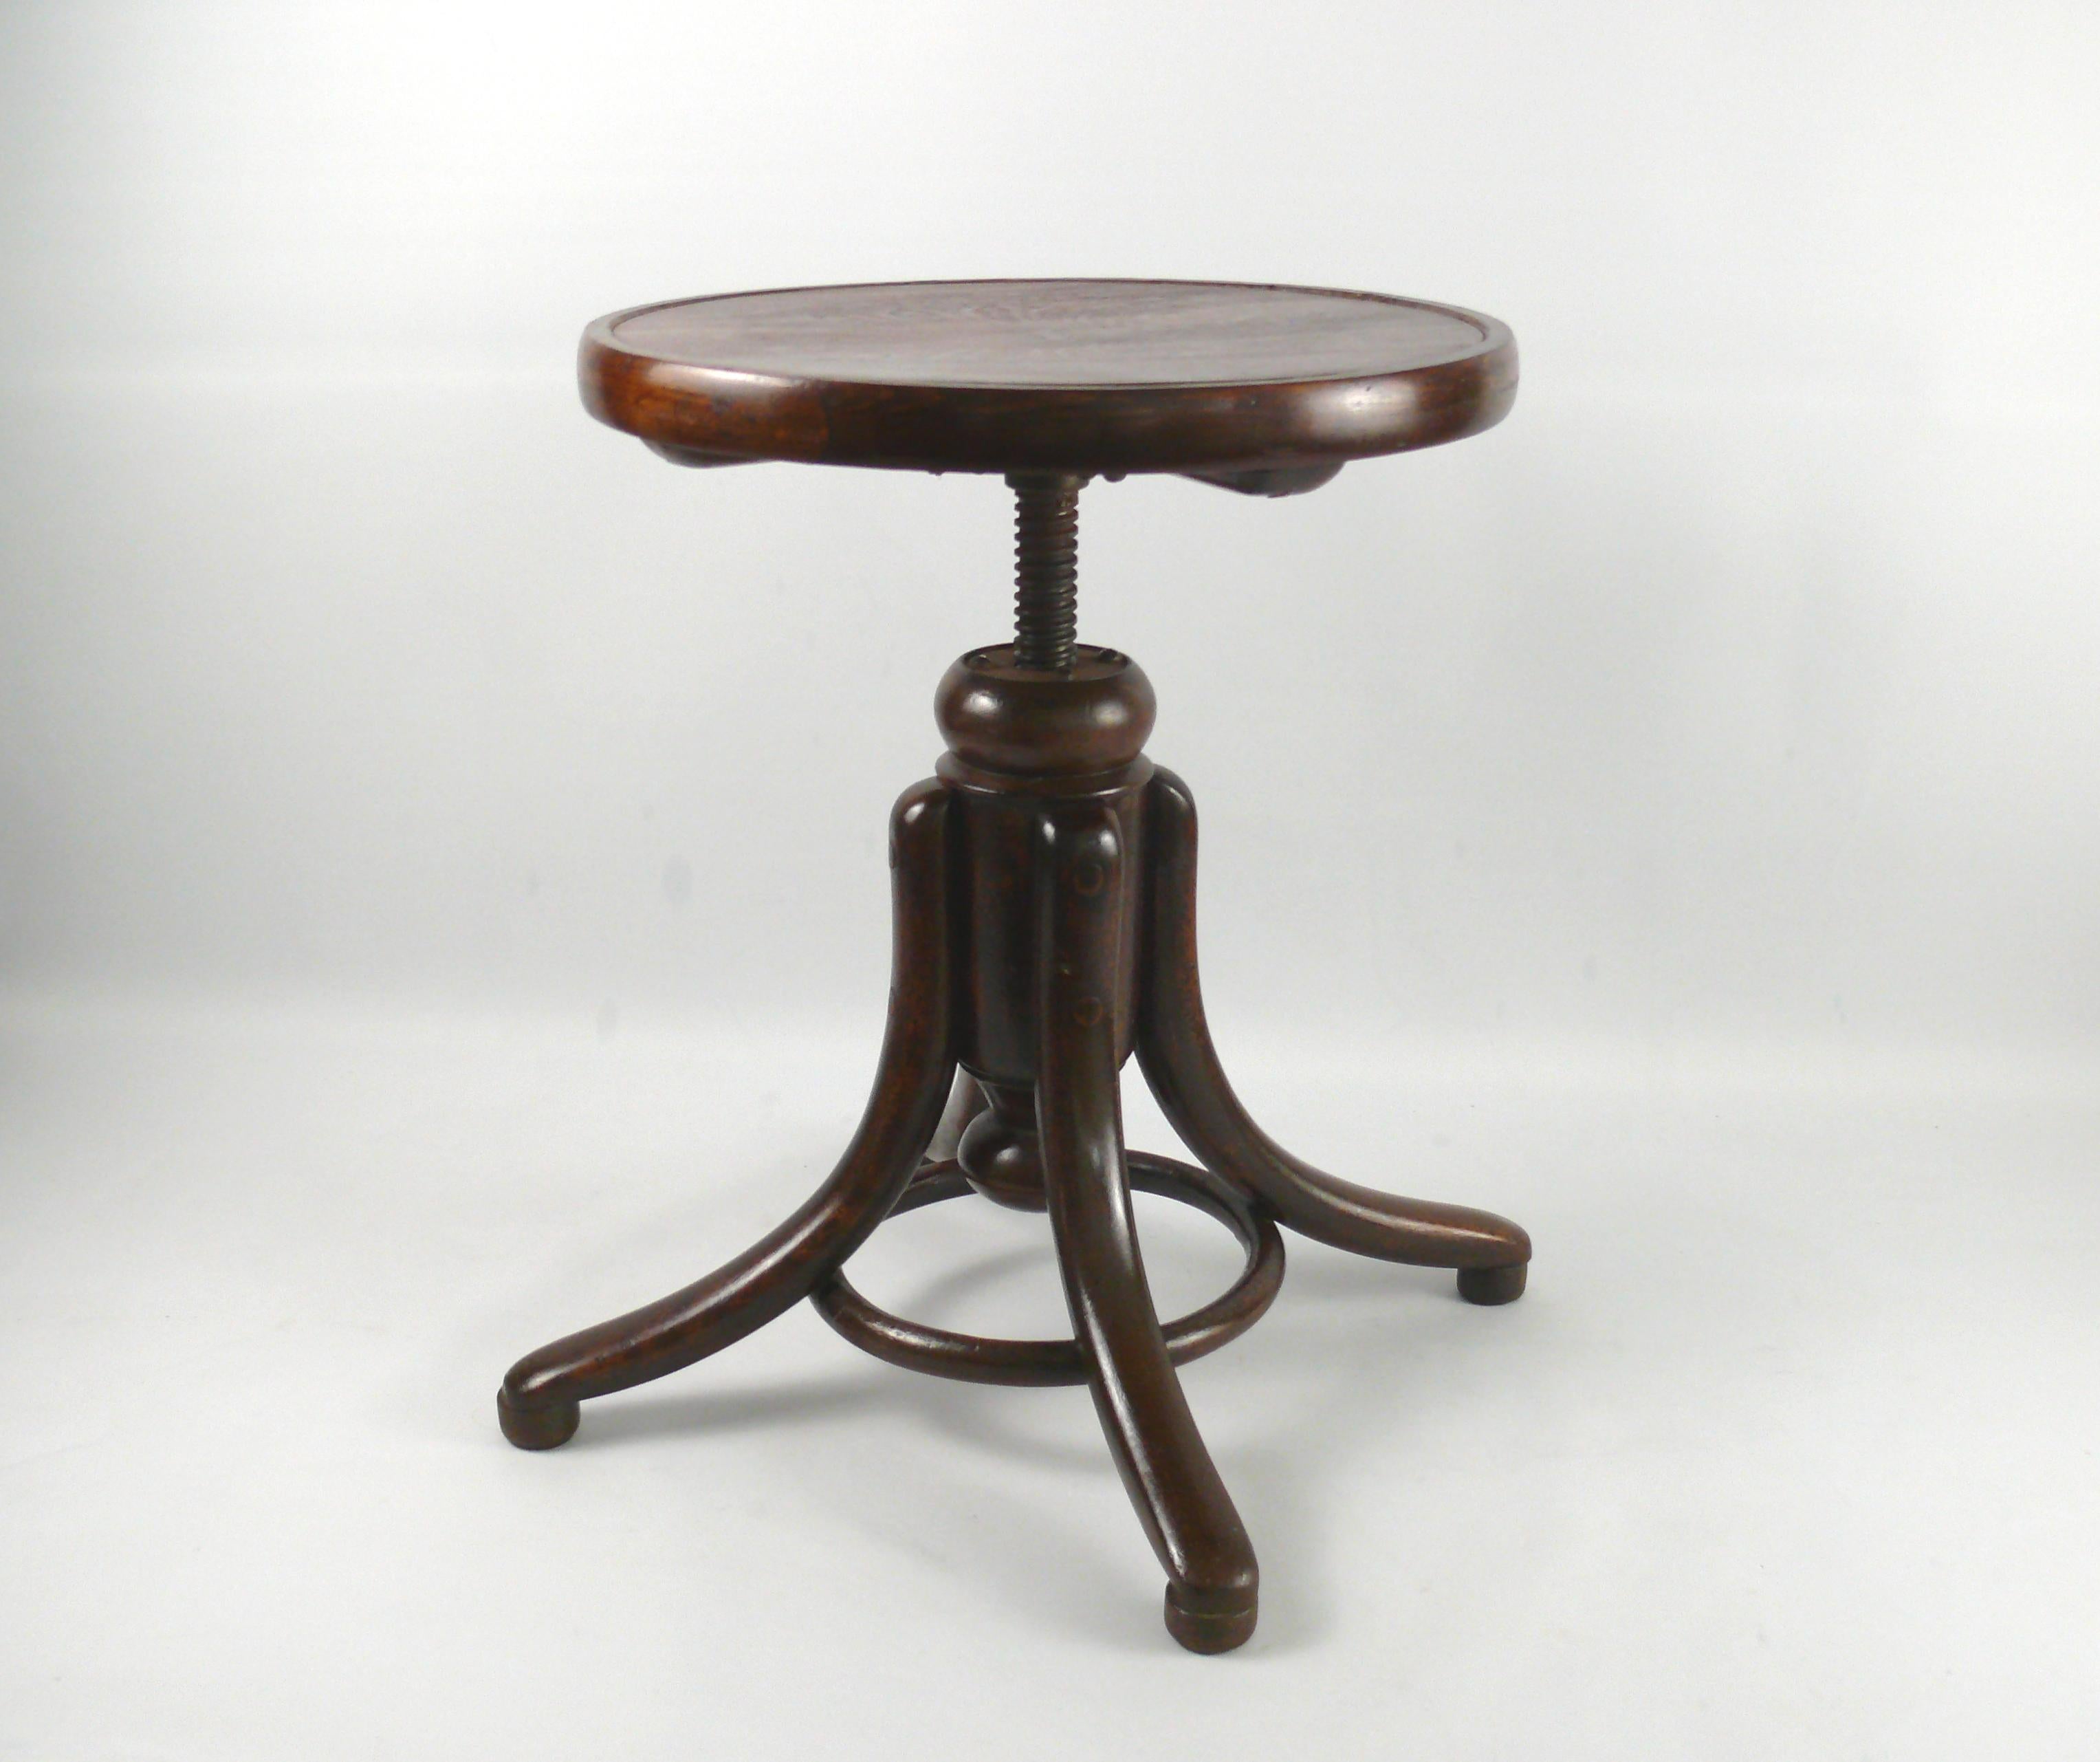 Original bentwood piano stool/swivel stool from Gebrüder Thonet. The piano stool is made of dark-stained (rosewood) beech wood painted with shellac and has four steam-bent feet with bentwood rings for stability. The stool can be adjusted in height